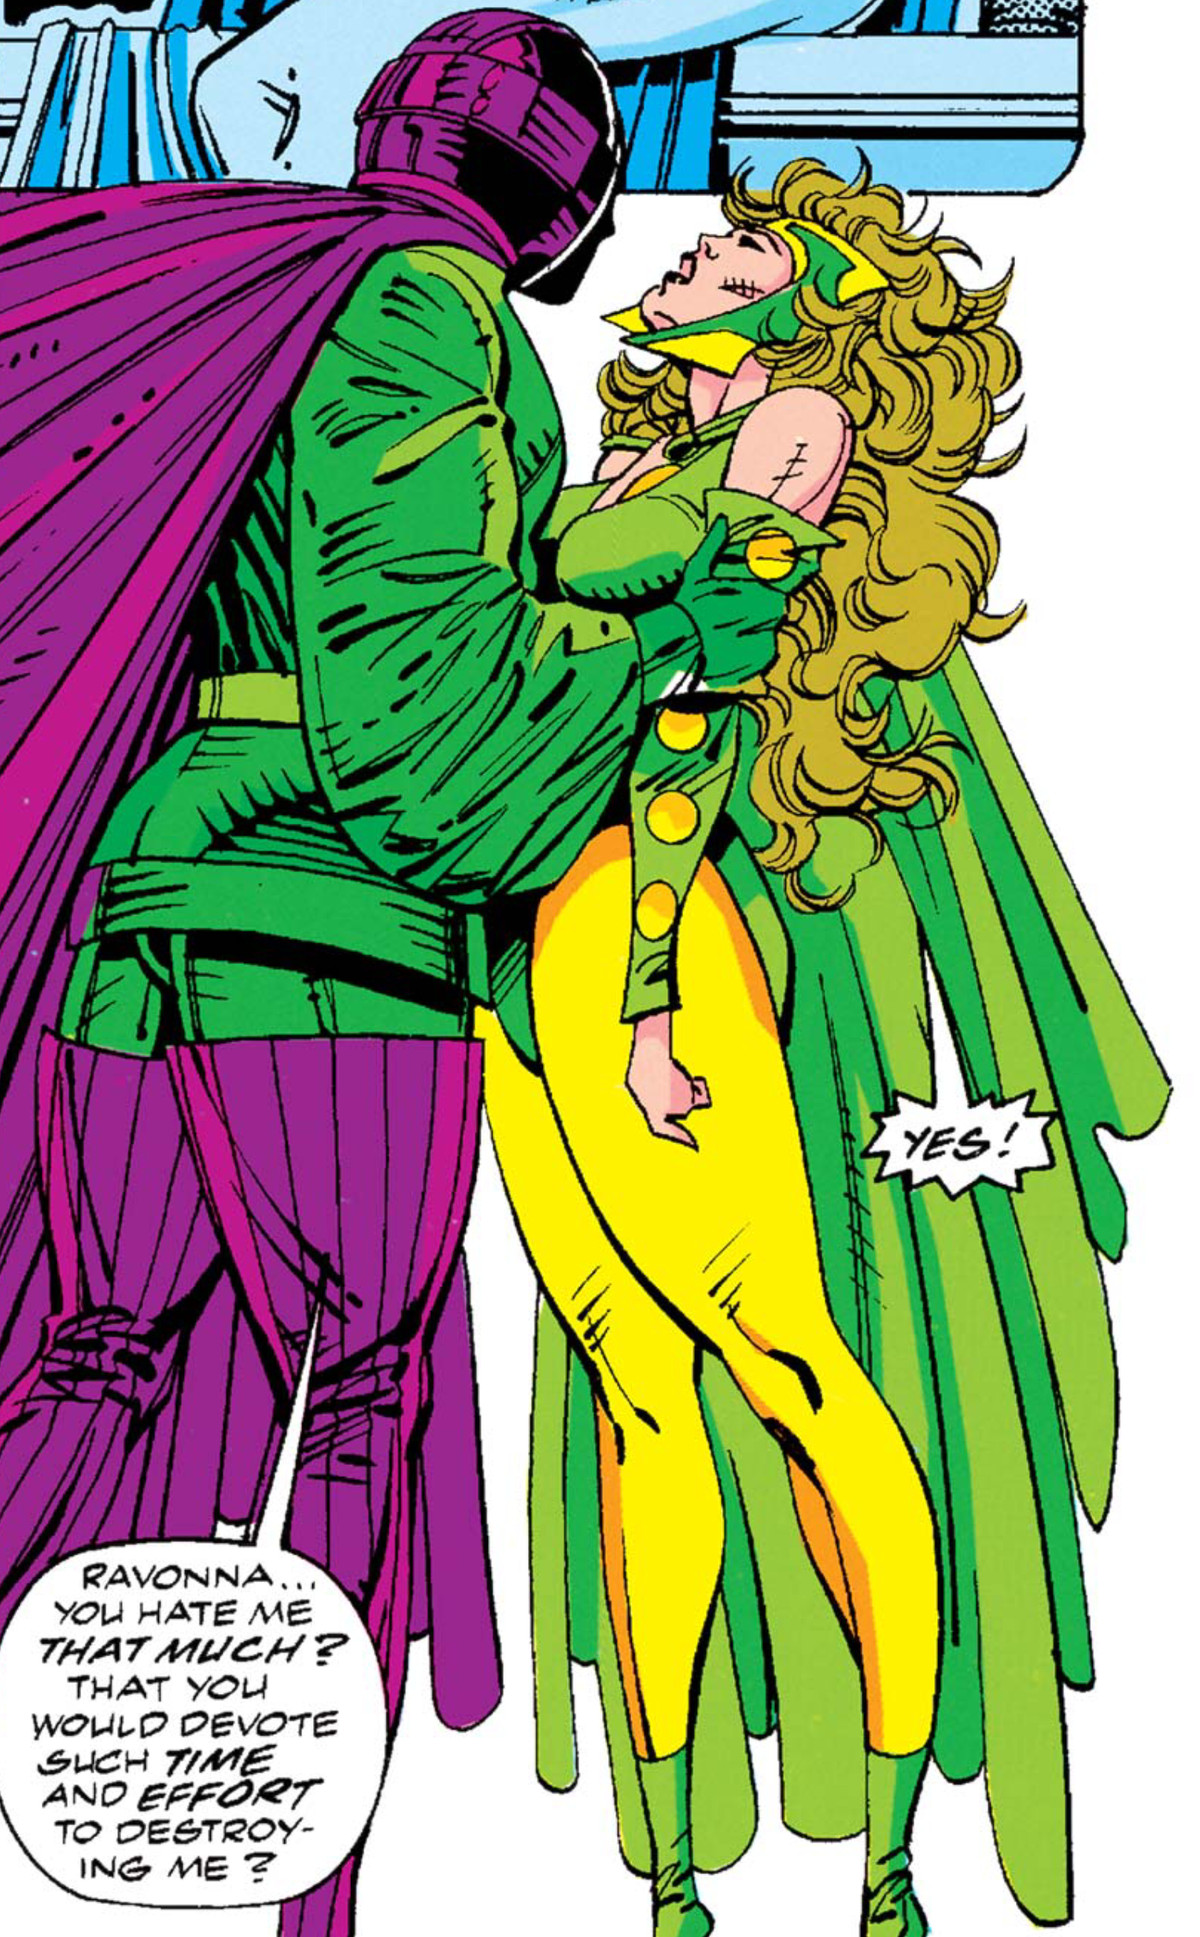 “Ravonna,” Kang says as he grips Ravonna Renslayer by the arms, “You hate me that much? That you would devote such time and effort to destroying me?” “Yes!” she cries, in Avengers Annual #21 (1992). 